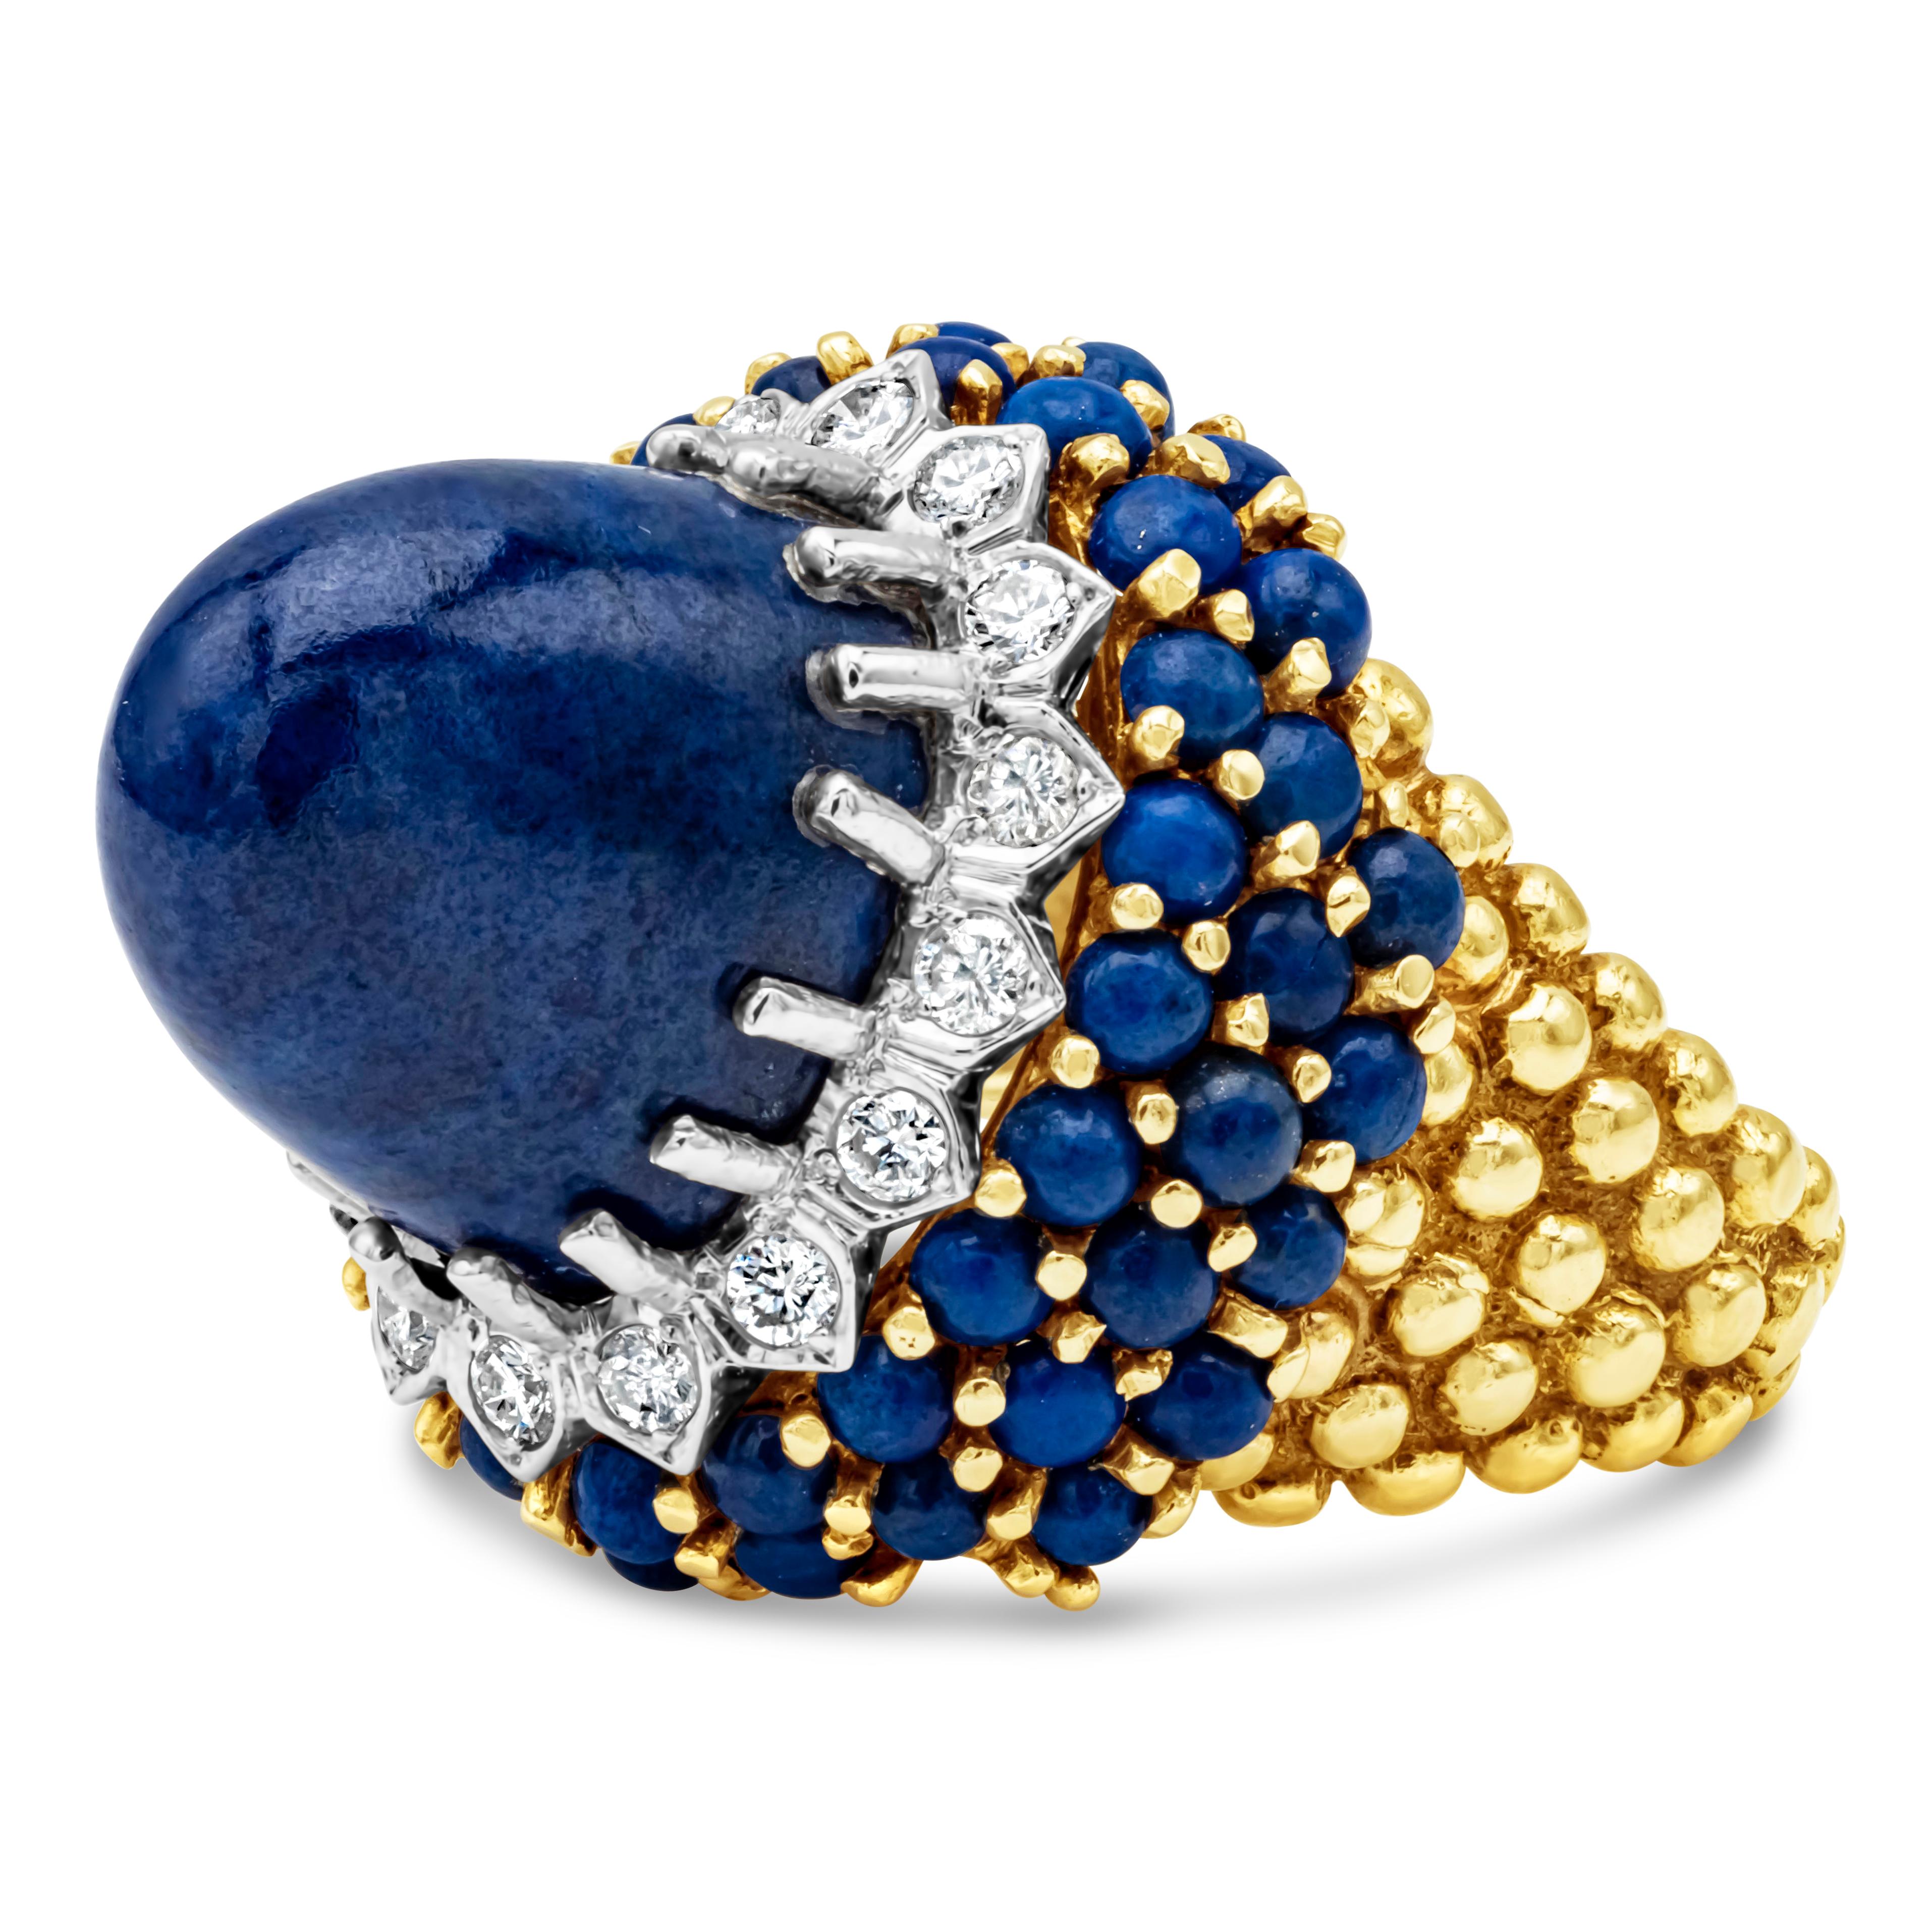  This vintage high dome cocktail ring showcasing a lapis lazuli blue cabochon the center stone, encrusted with 16 brilliant round shape diamonds weighing 0.50 carats total. Set in a beautiful dome with blue cabochon in 18k yellow gold. Size 7.5 US.